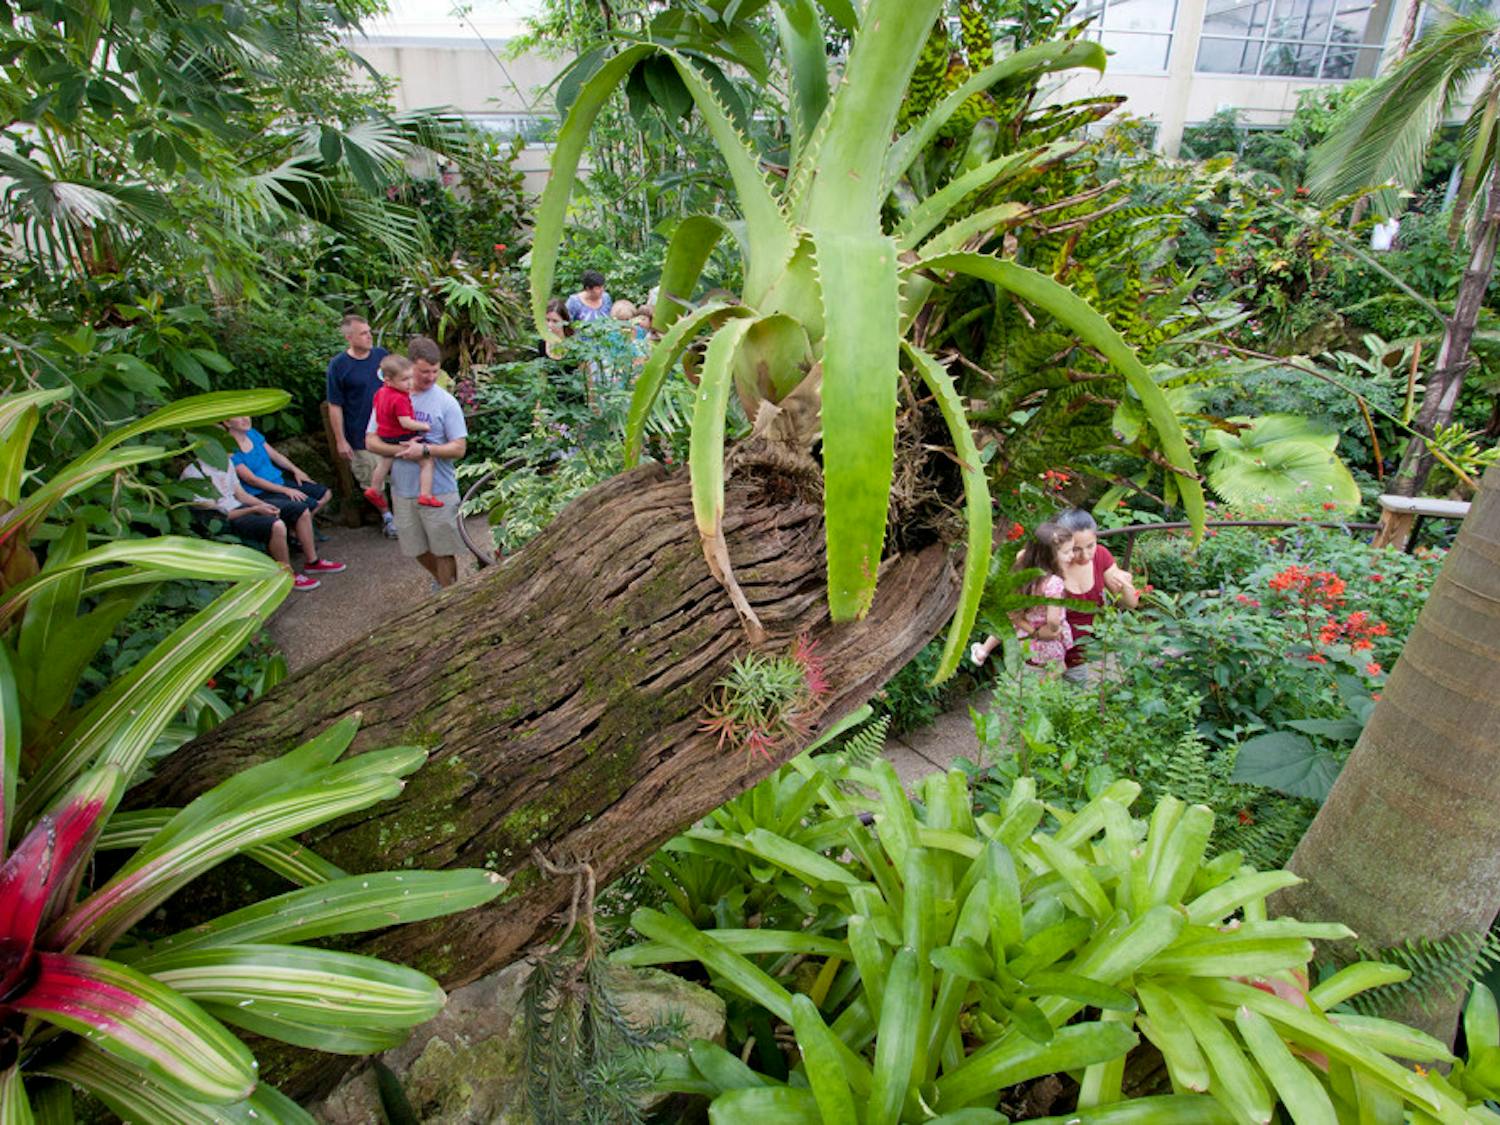 The Butterfly Rainforest, at 3215 Hull Road, is conveniently located on campus inside the Florida Museum of Natural History.